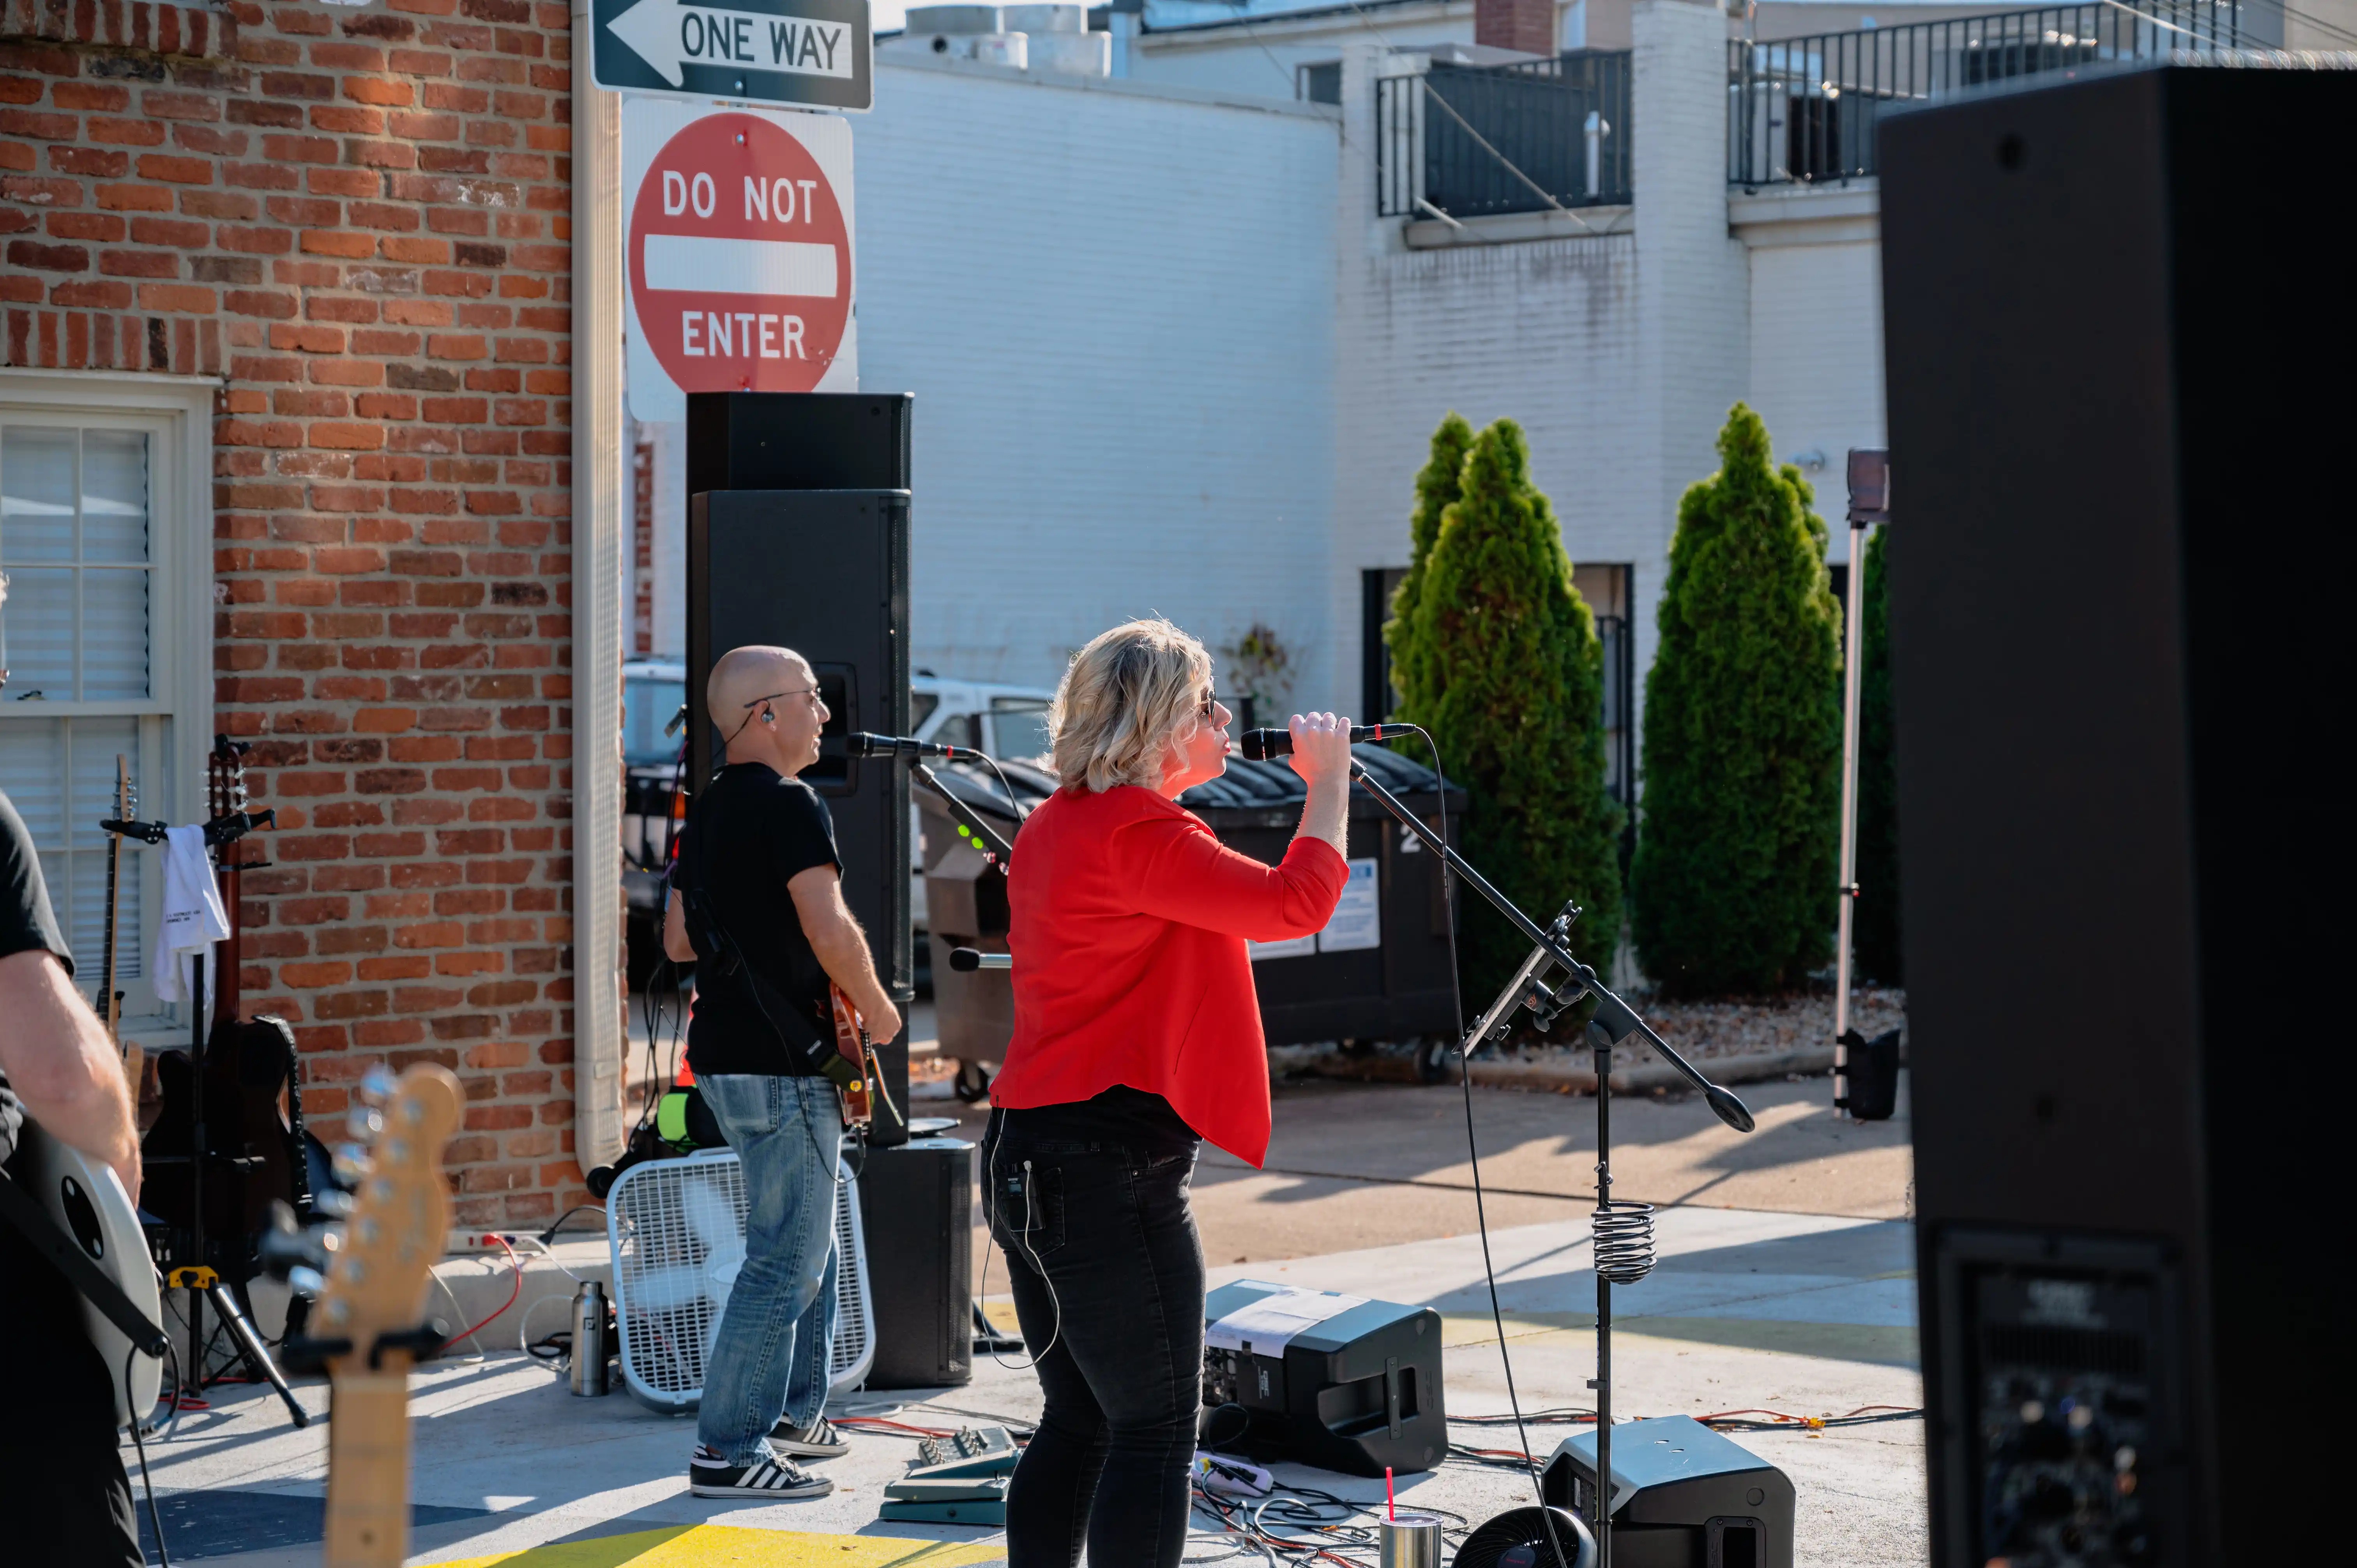 A band performing at an outdoor event with a "Do Not Enter" sign visible in the background.